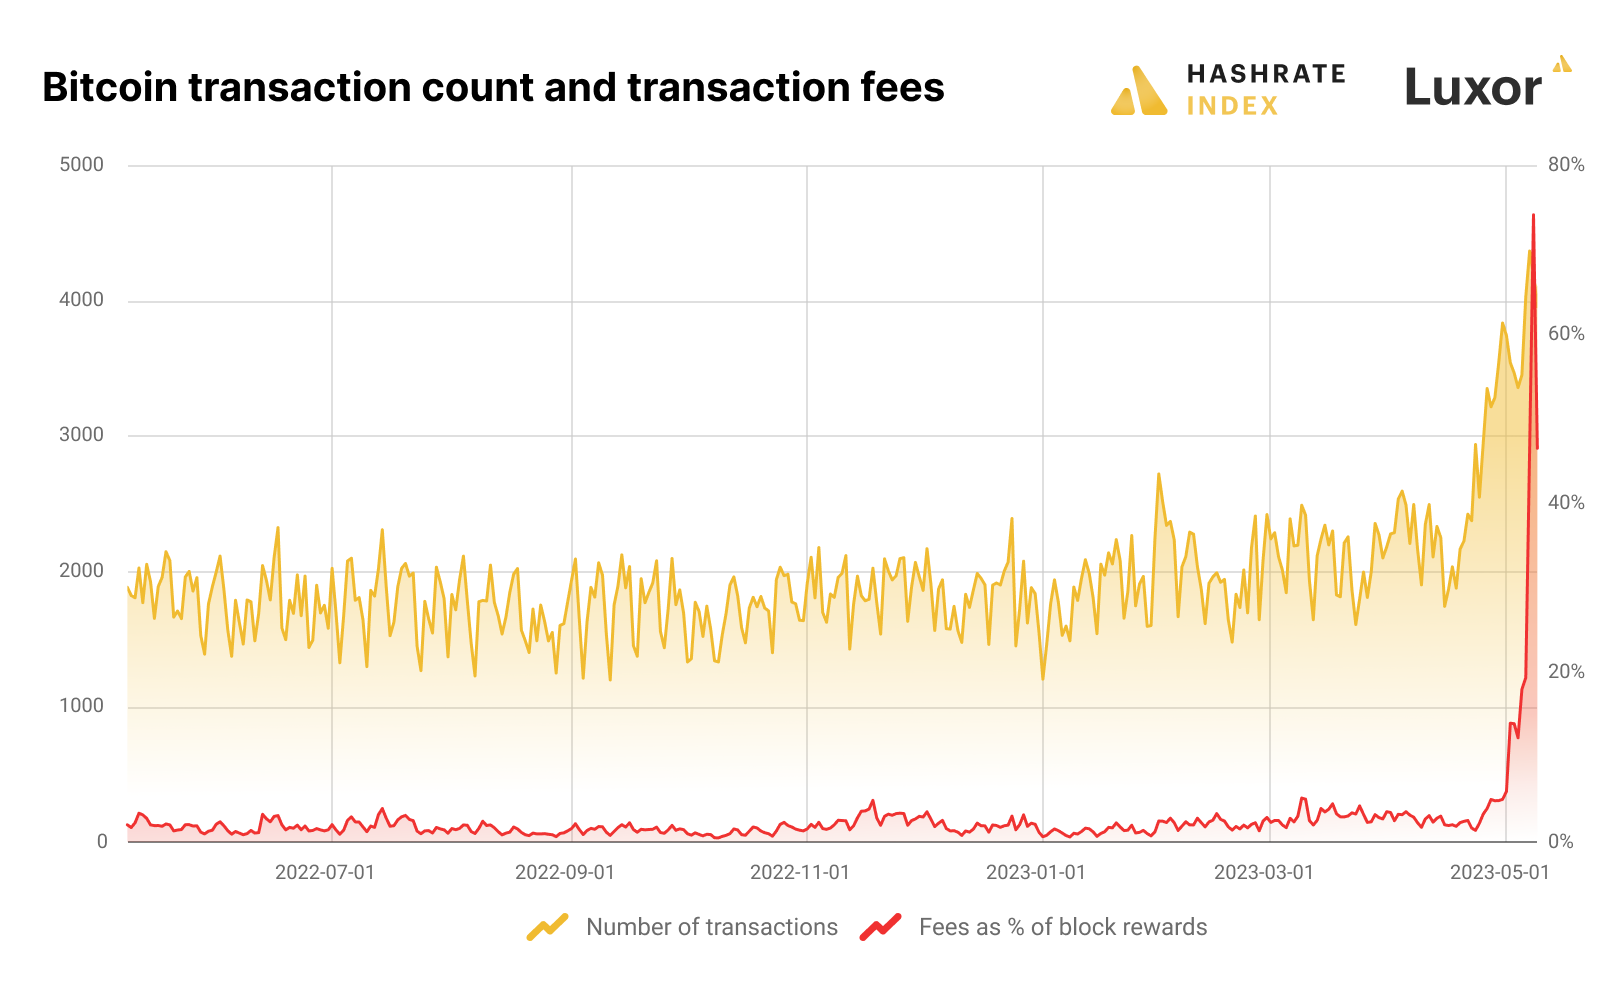 Bitcoin daily transaction count and Bitcoin trasnaction fees as a percentage of block rewards | Source: Hashrate Index